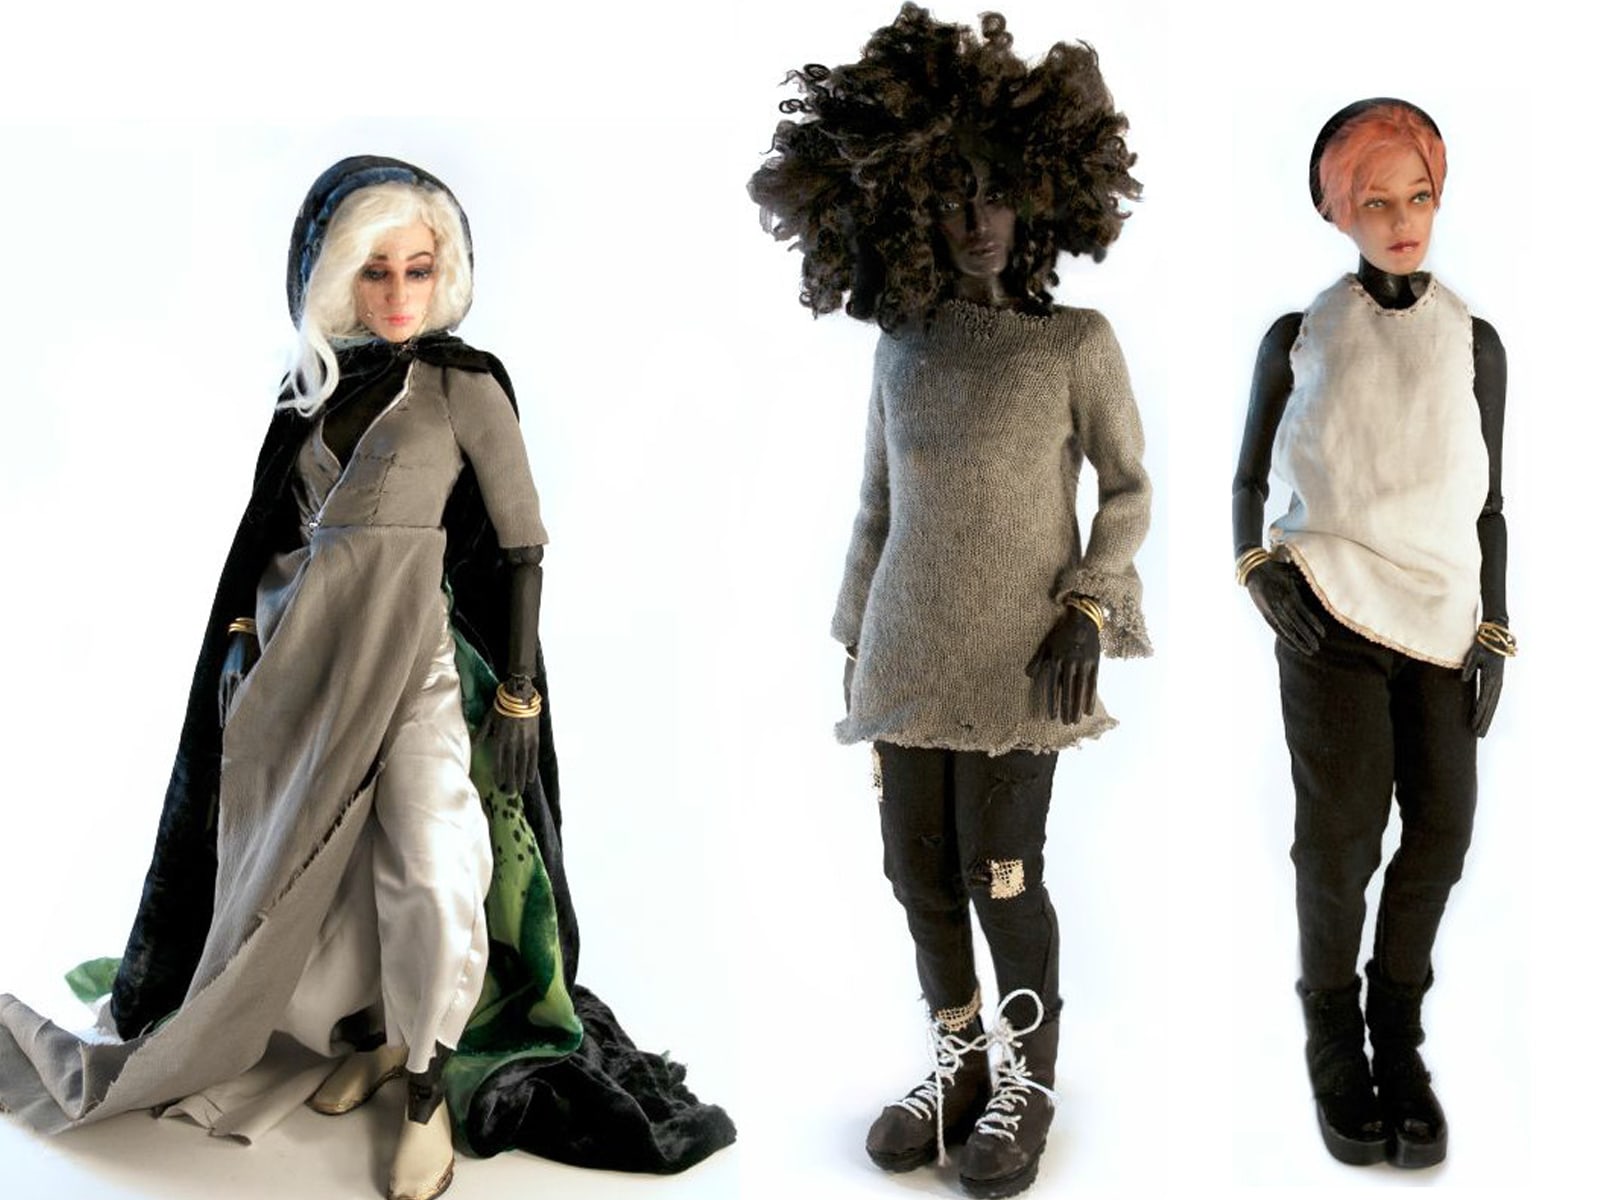 Isabel's action figures are dramatically swathed in layers of natural fabric